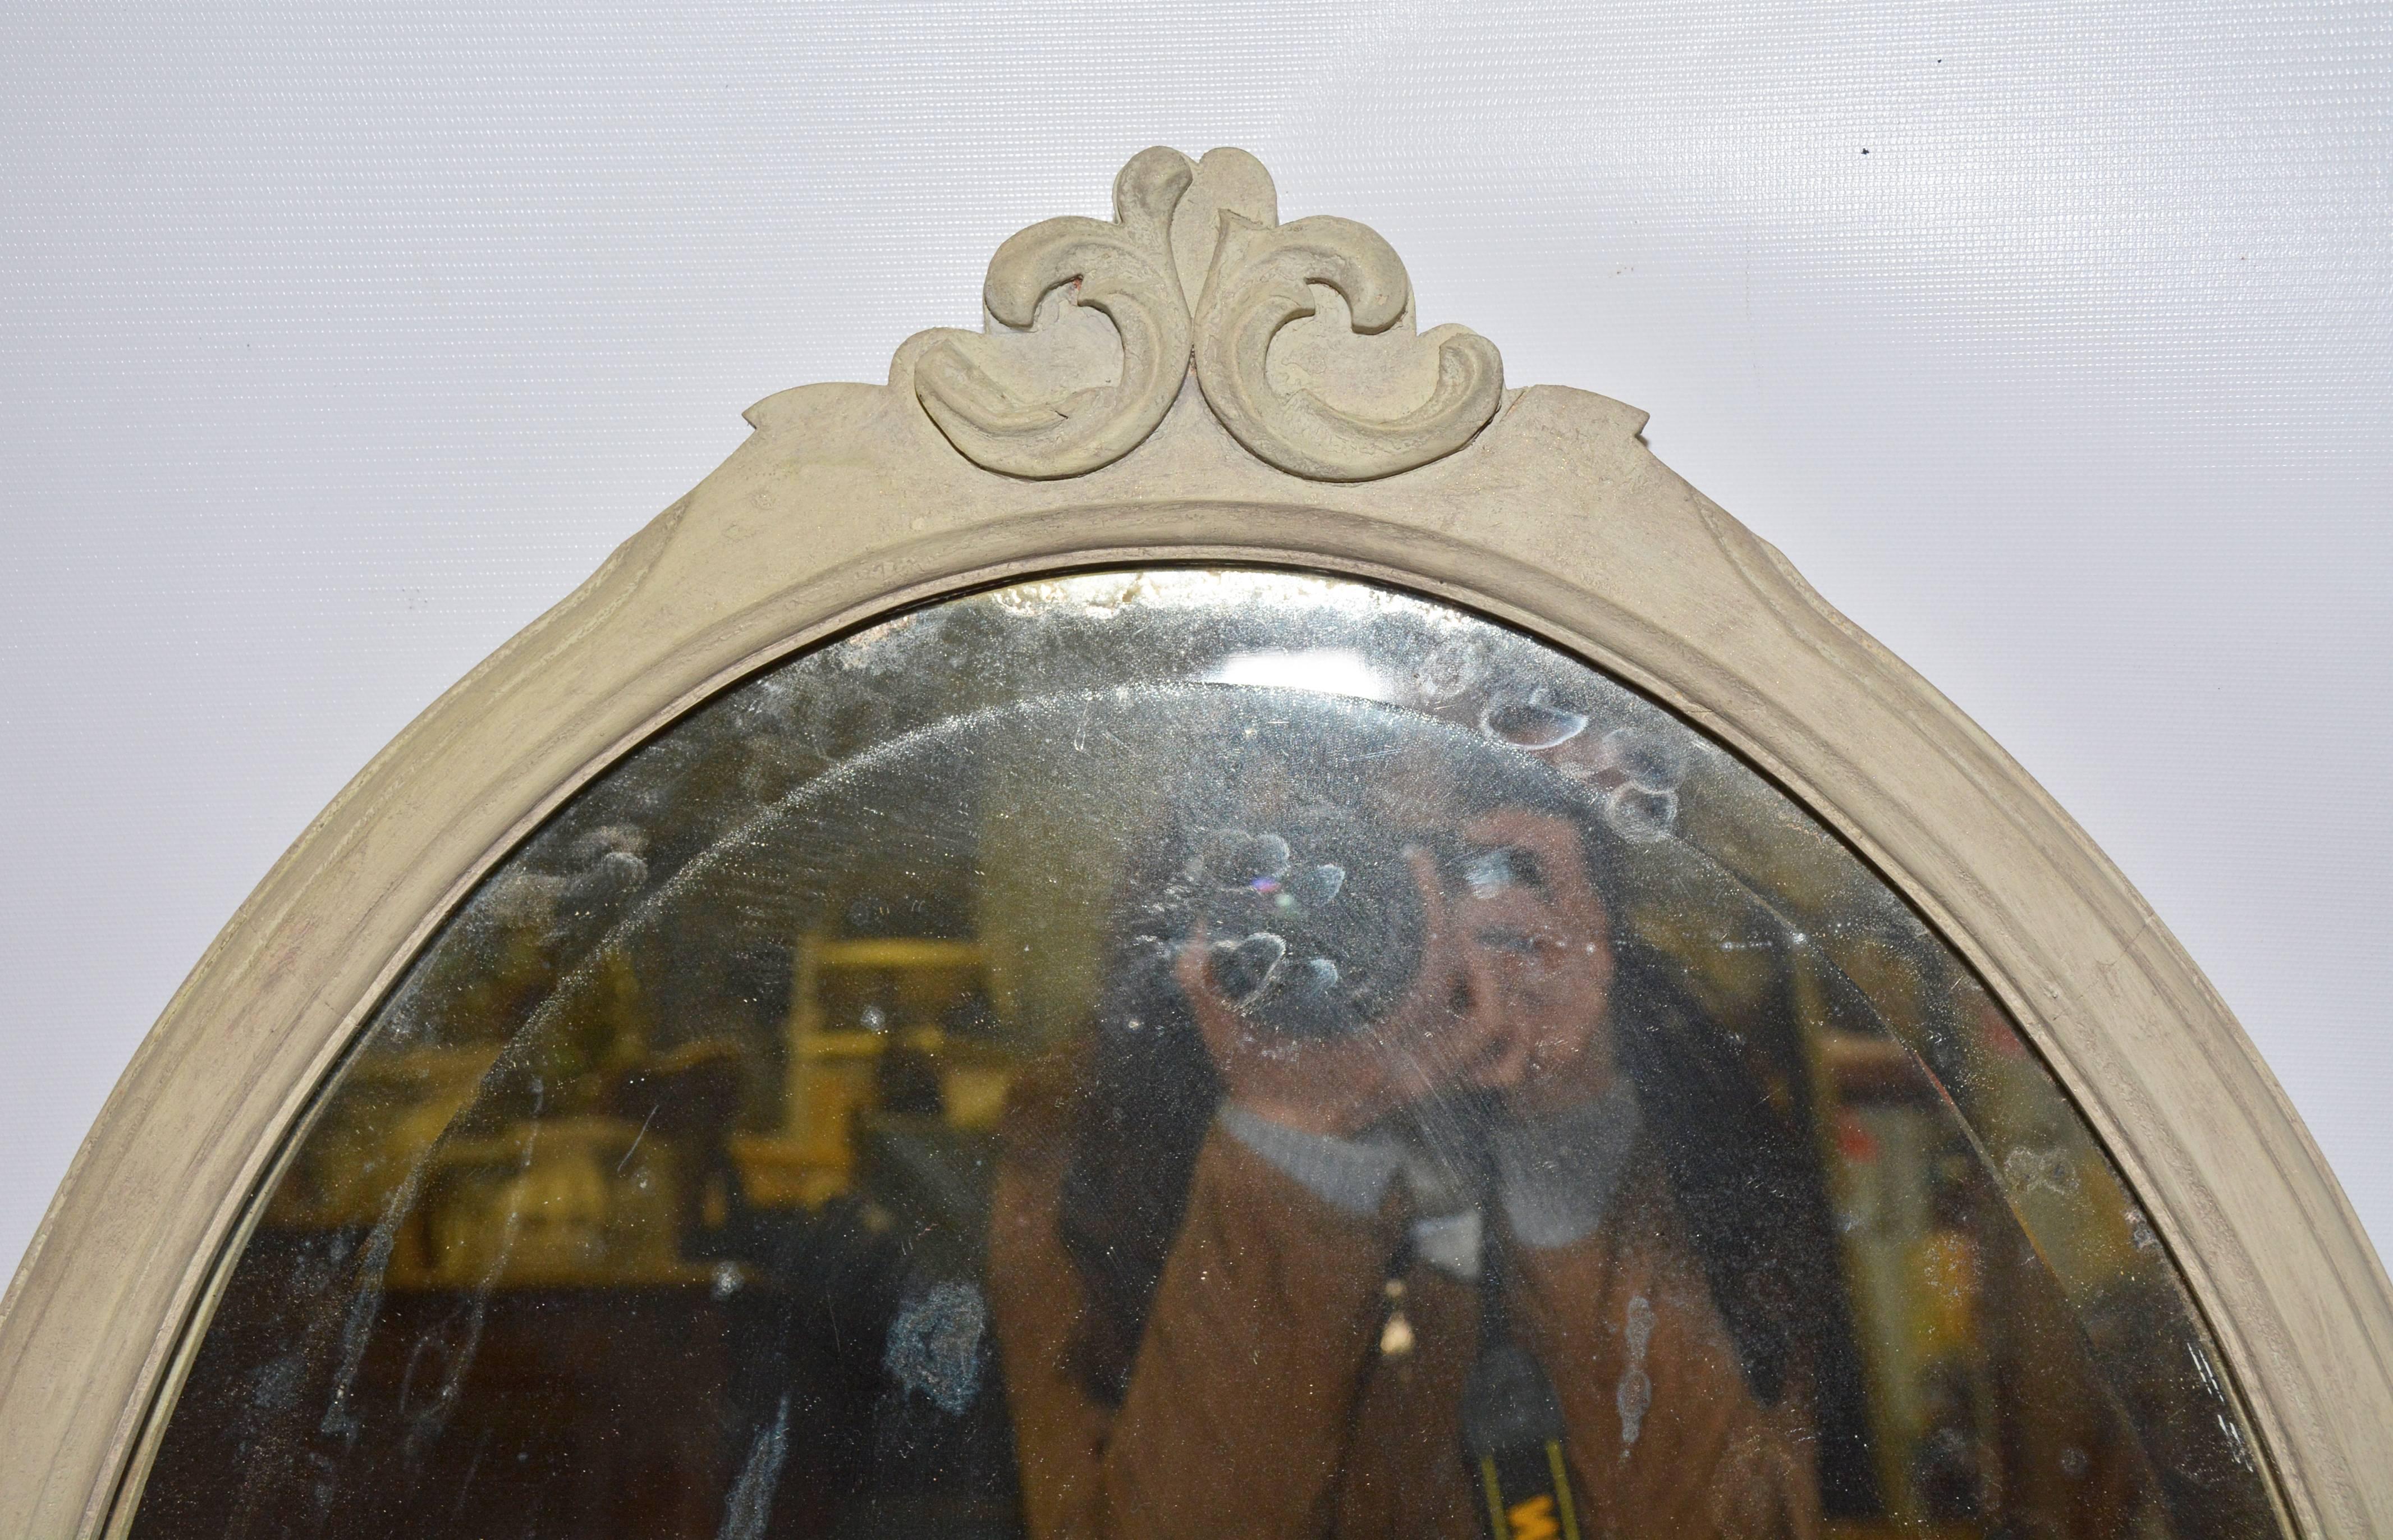 A fine oval frame mirror, painted light grey, is decorated at the top with two back-to-back scrolls. The silvered mirror is bevelled and the backing is wood and wired for hanging.